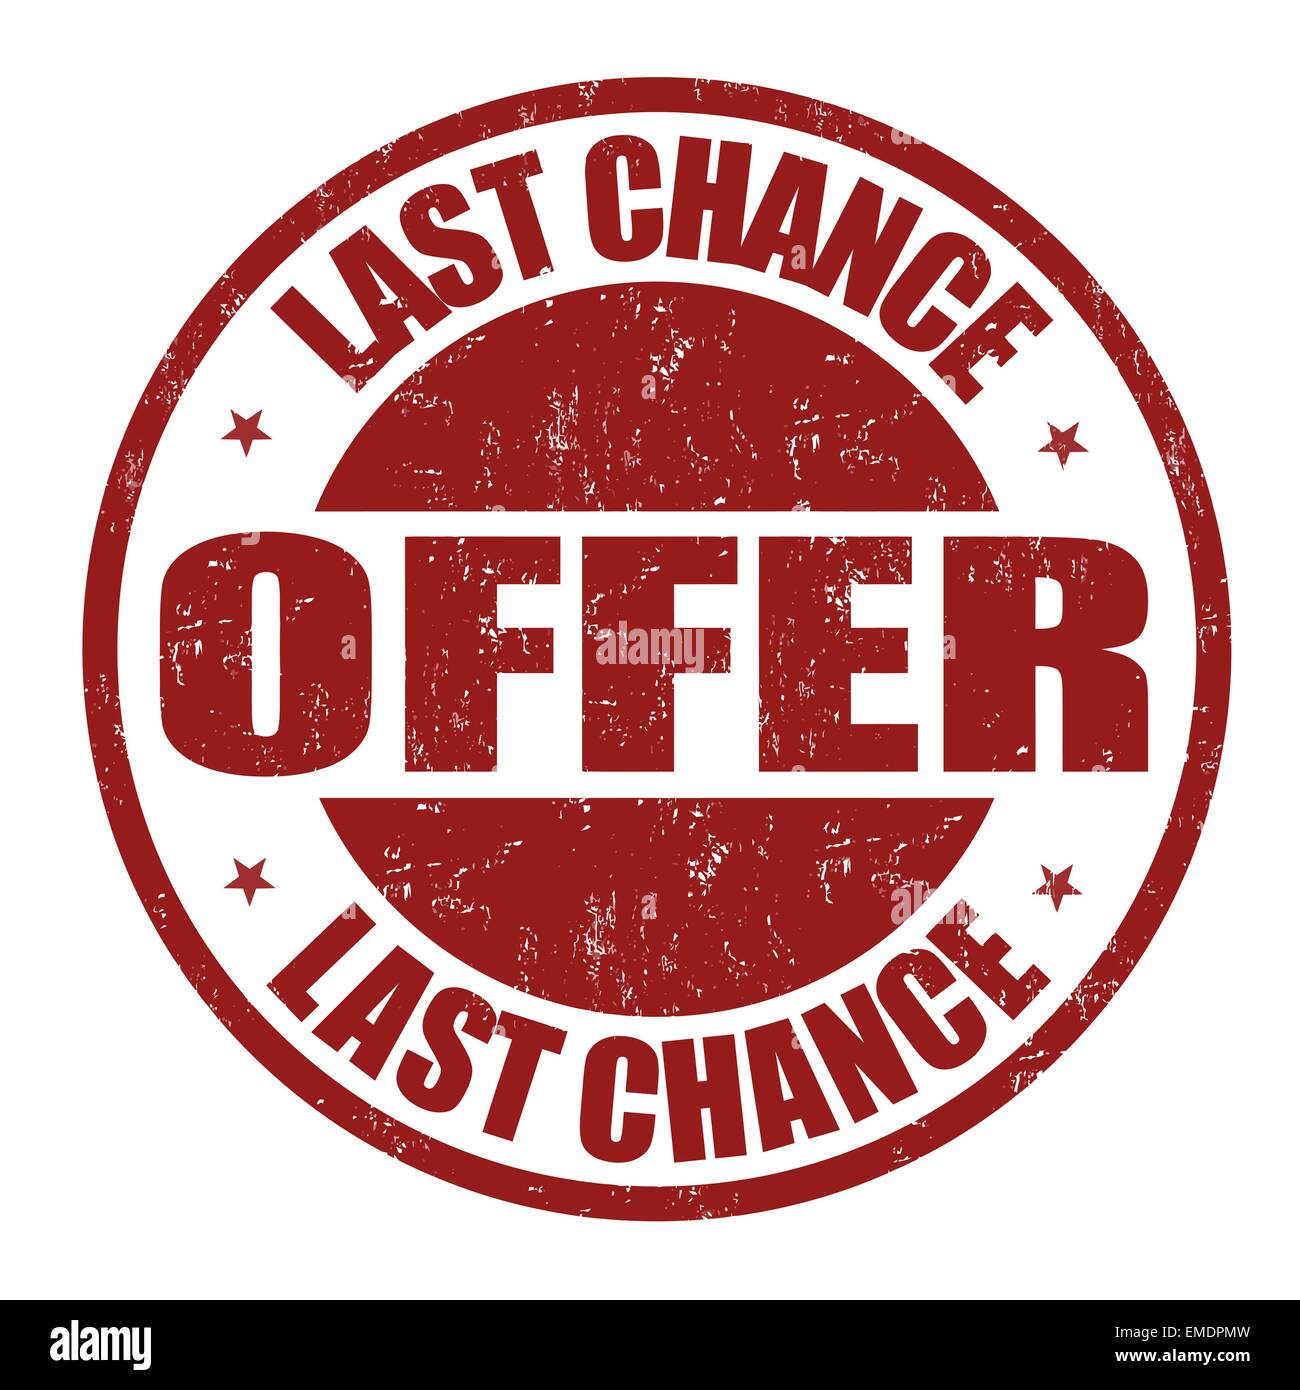 Last chance offer stamp Stock Vector